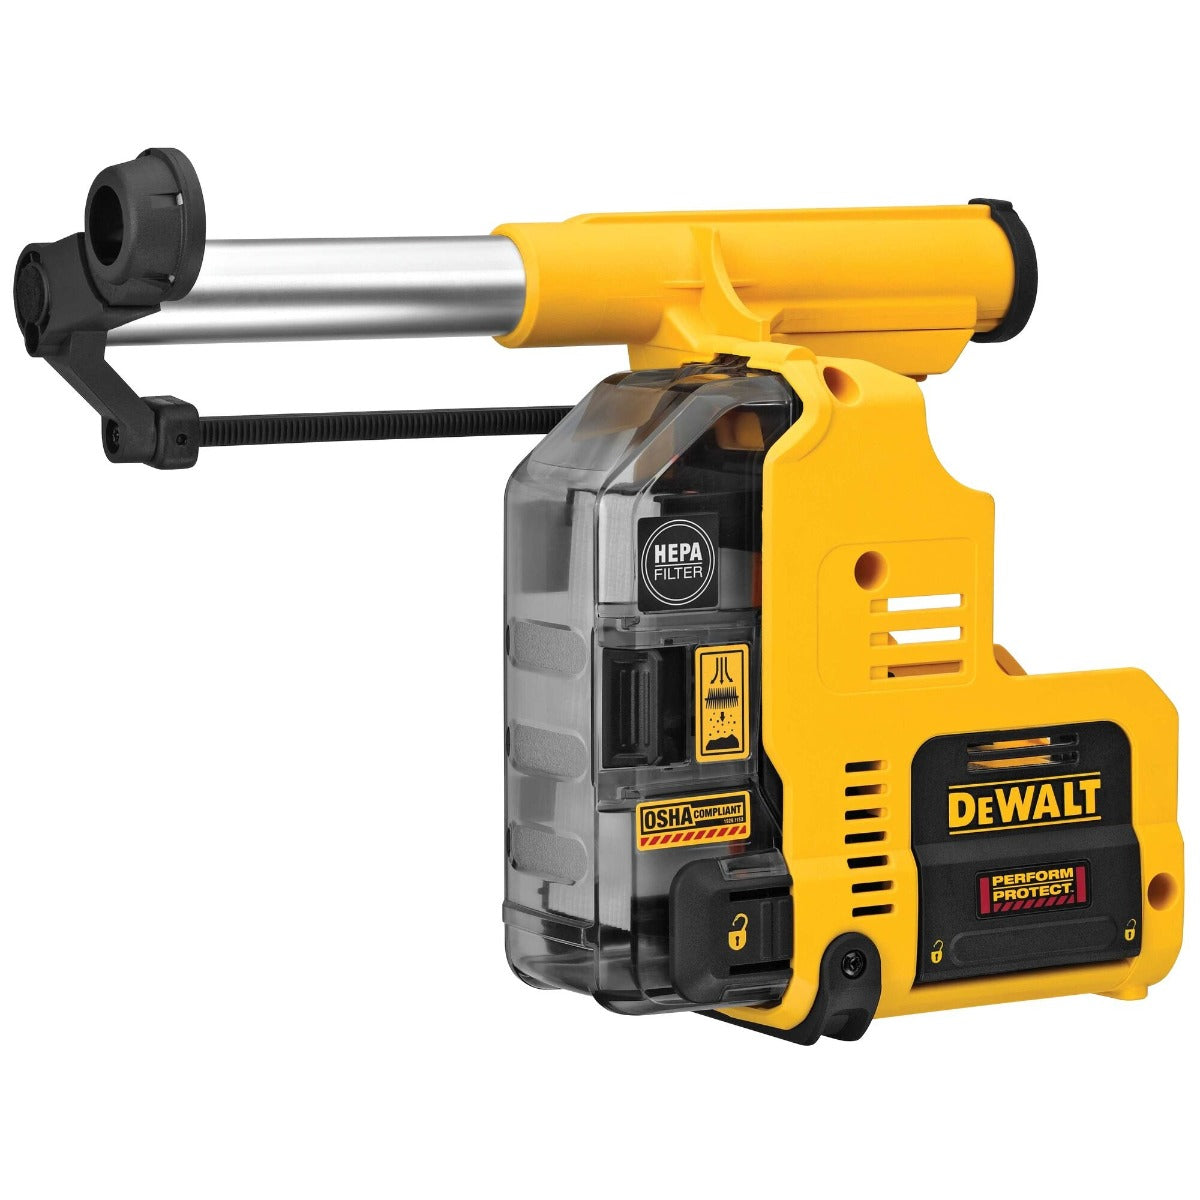 Dewalt DWH303DH Dust Extractors For Rotary Hammers